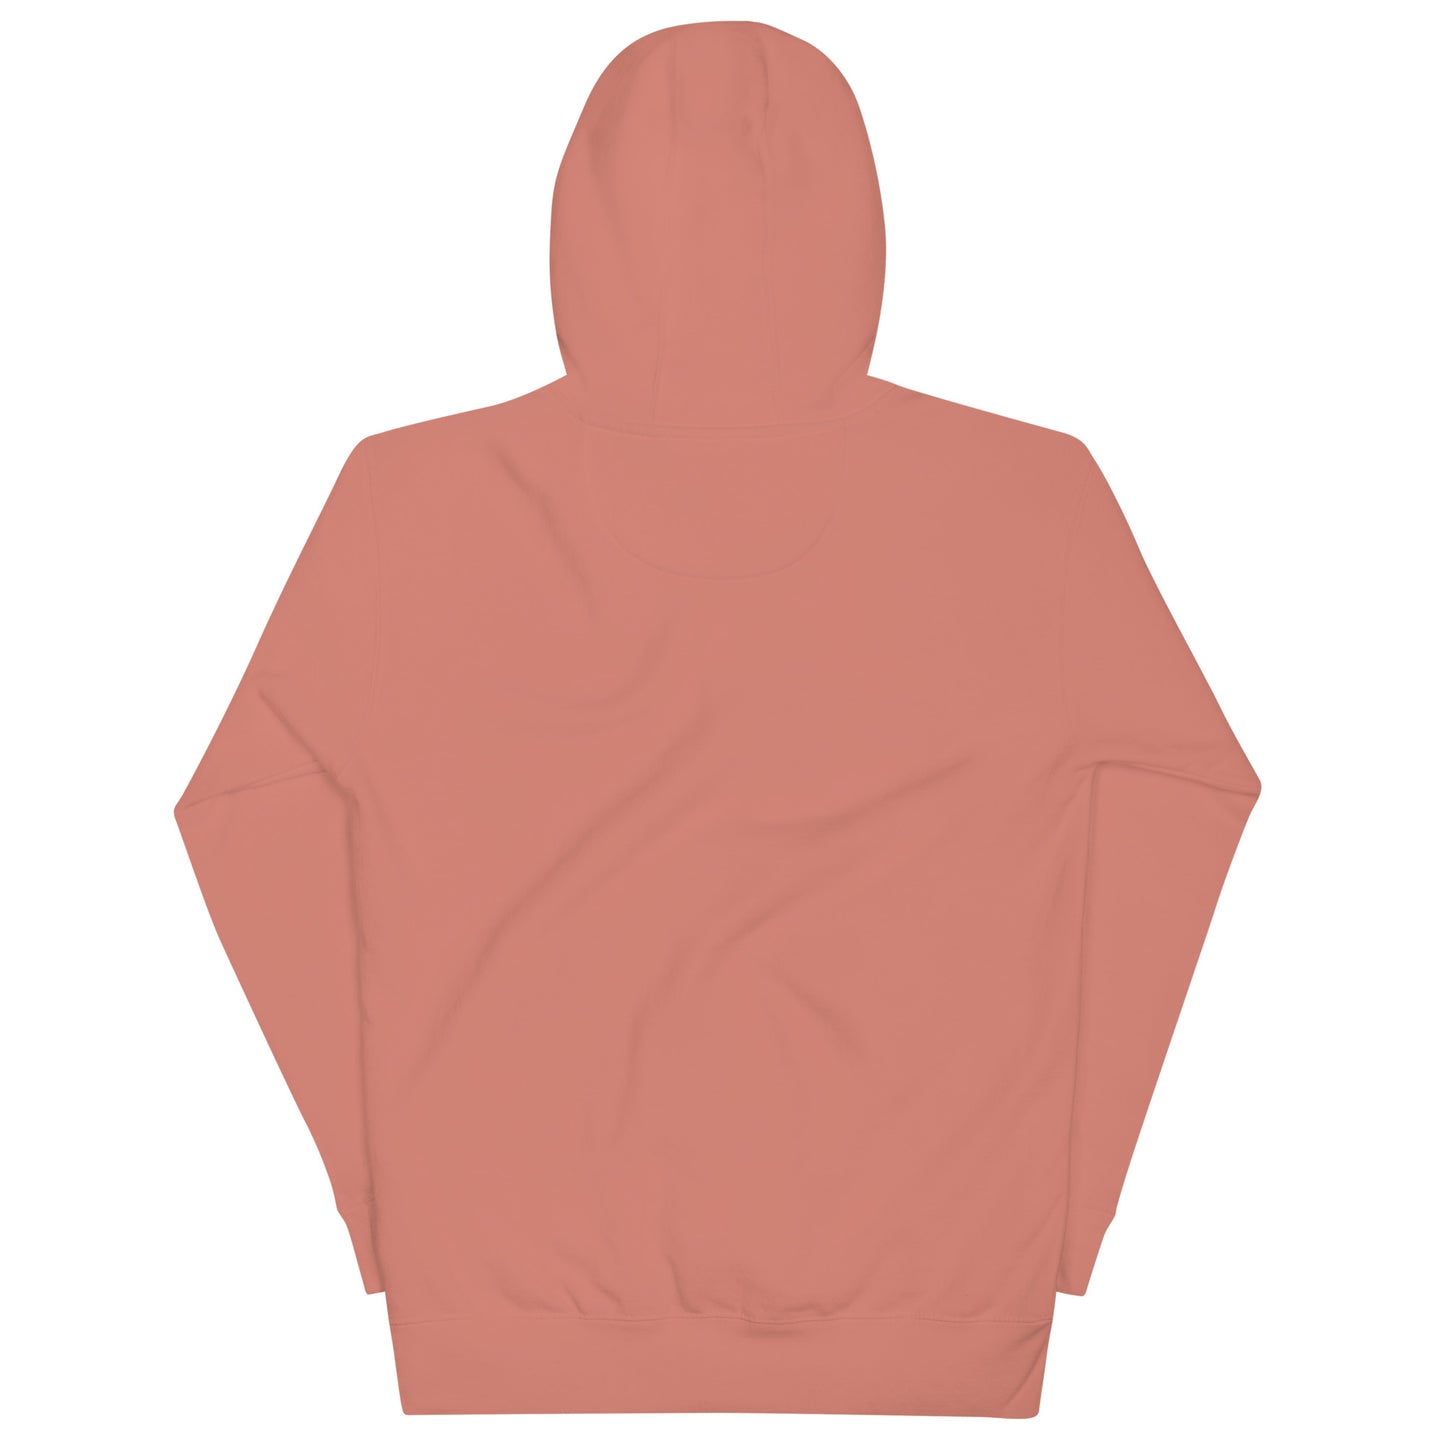 back of hoodie Leonardo pink by B.Different Clothing independent streetwear brand inspired by street art graffiti